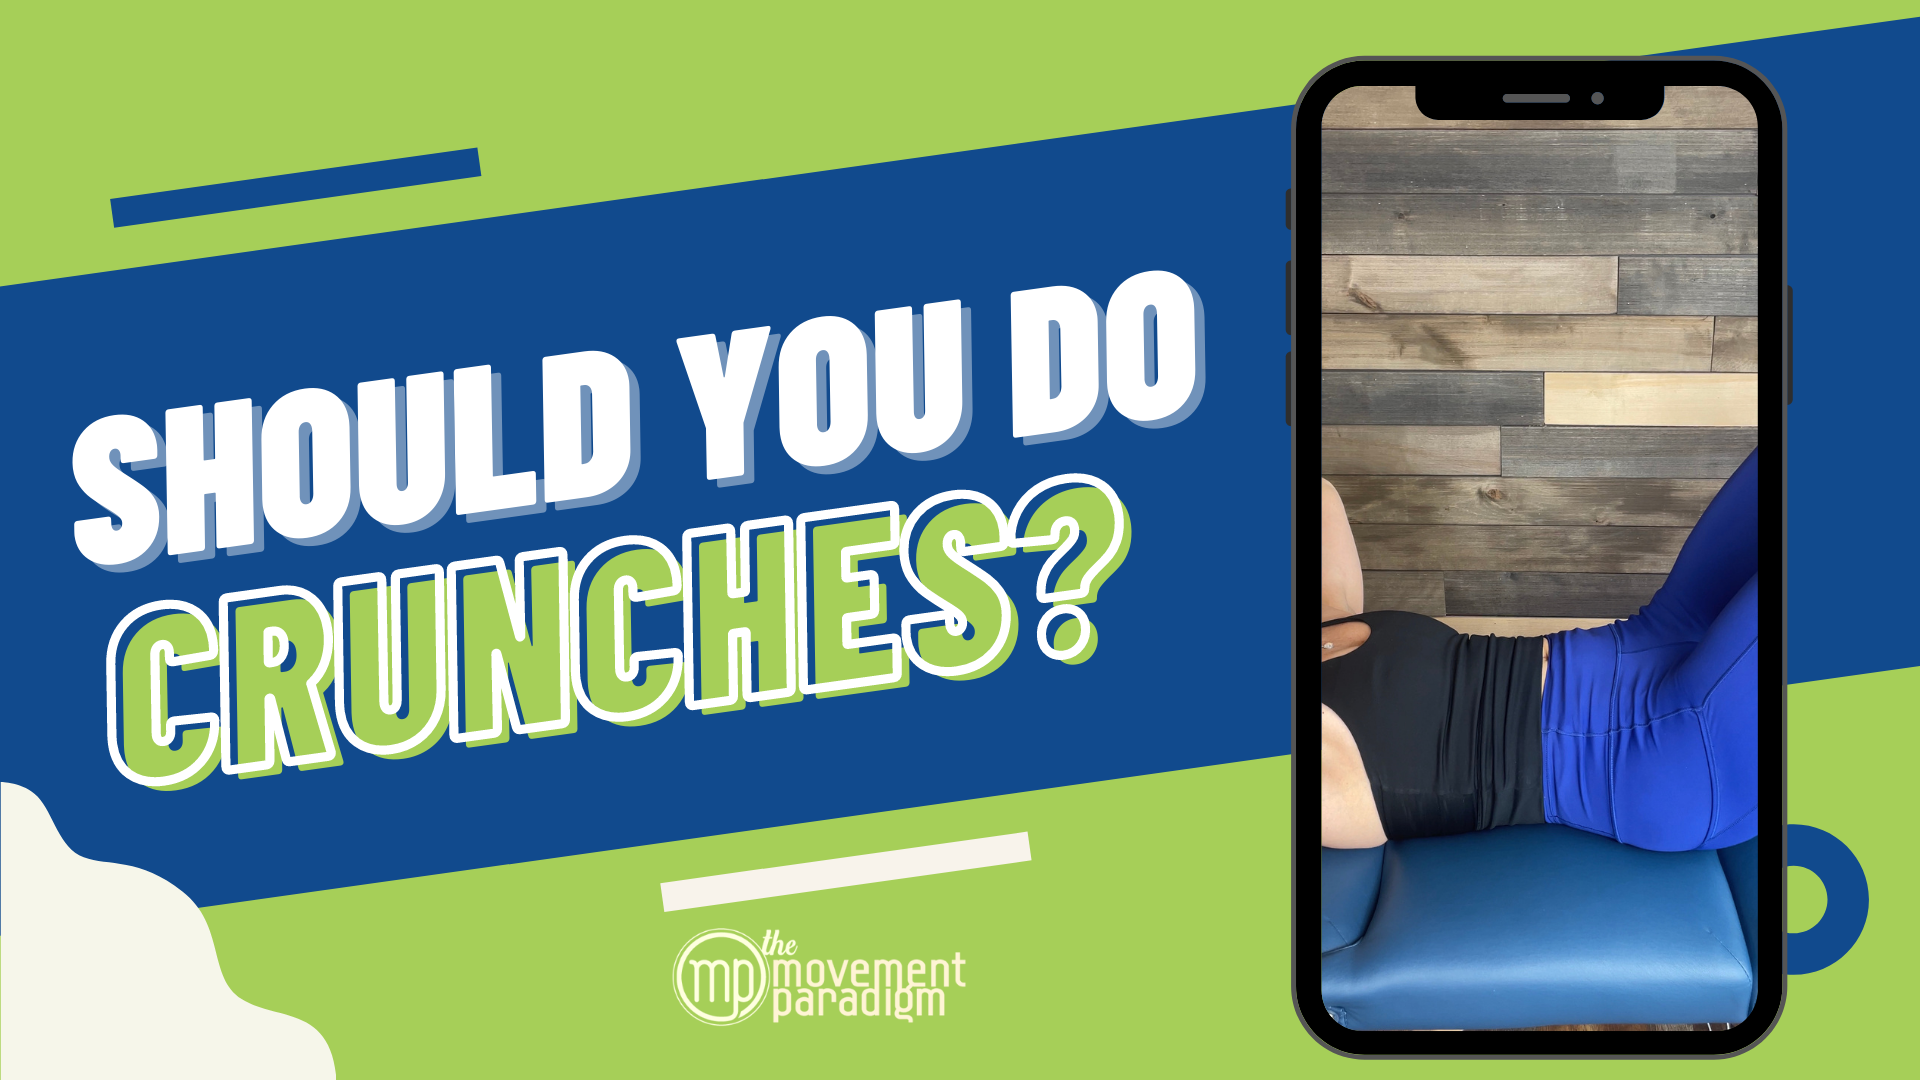 Should you do crunches?